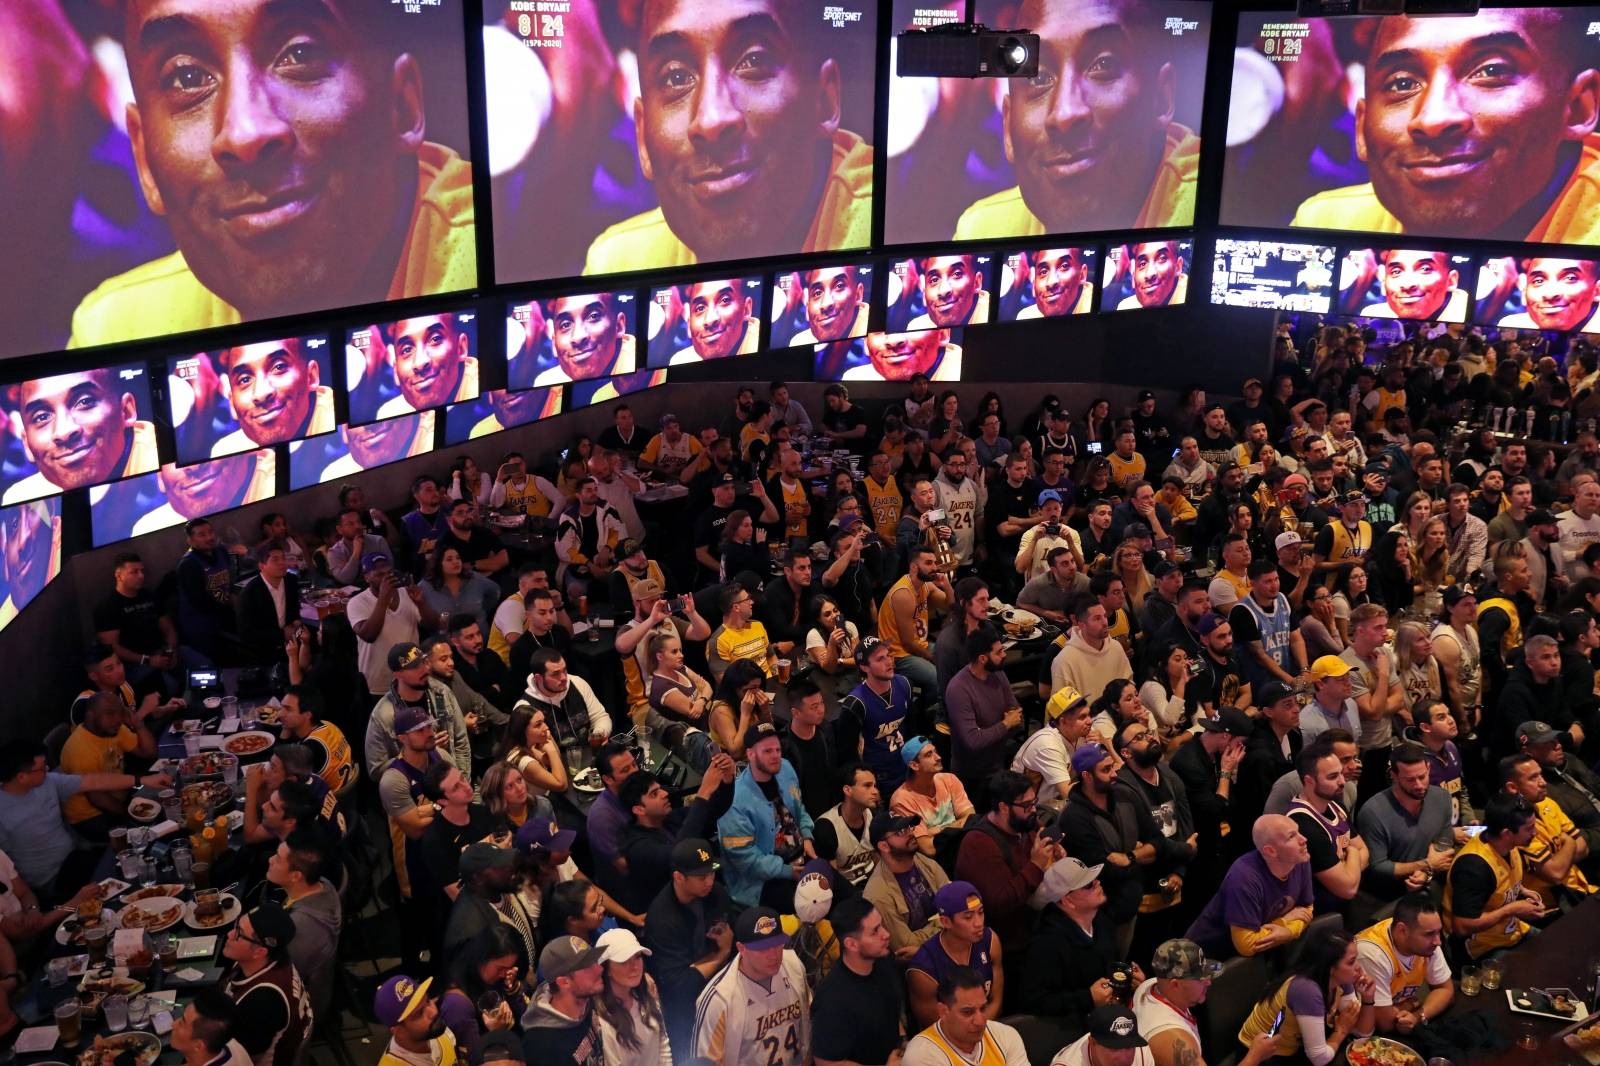 An image of Kobe Bryant appears on screens at Tom’s Watch Bar as fans watch a televised Los Angeles Lakers home game